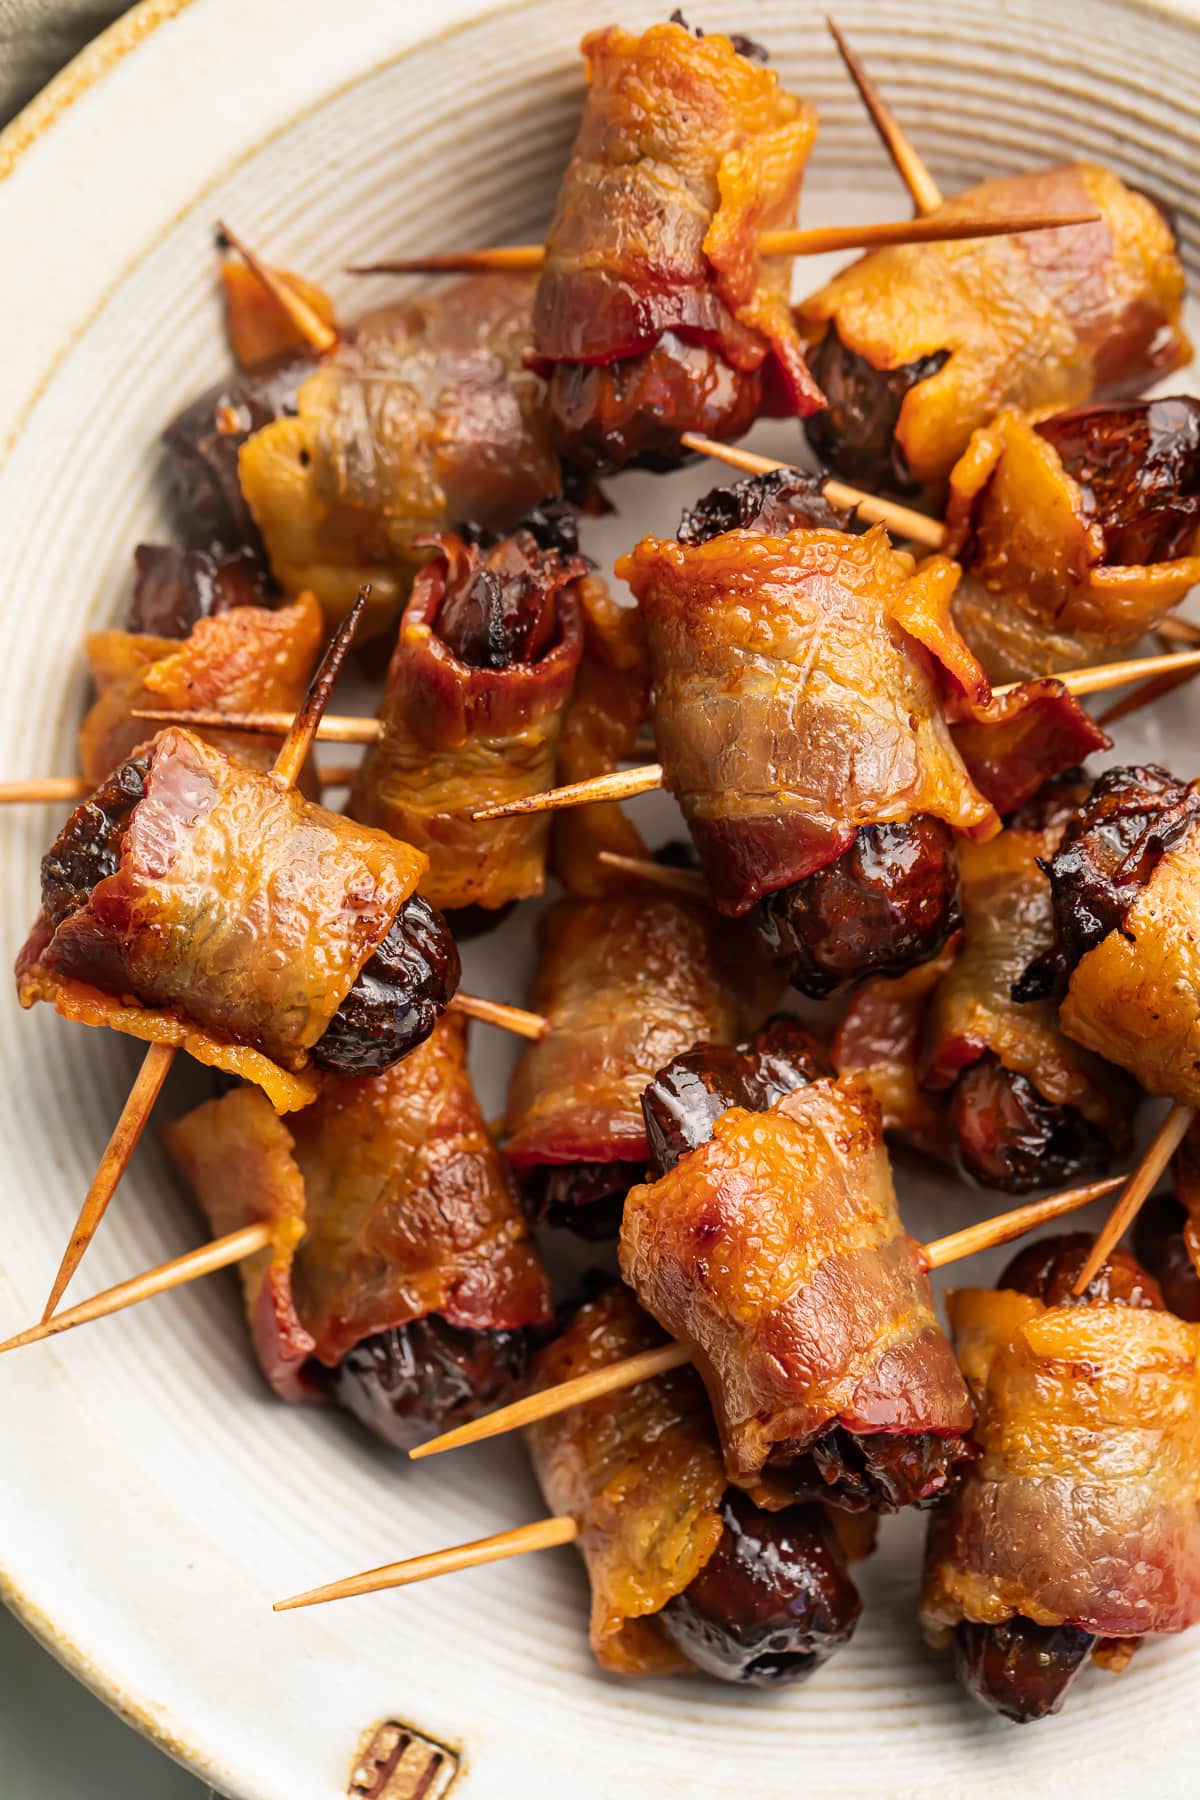 Bacon-wrapped dates, skewered by toothpicks, piled up in a large bowl.